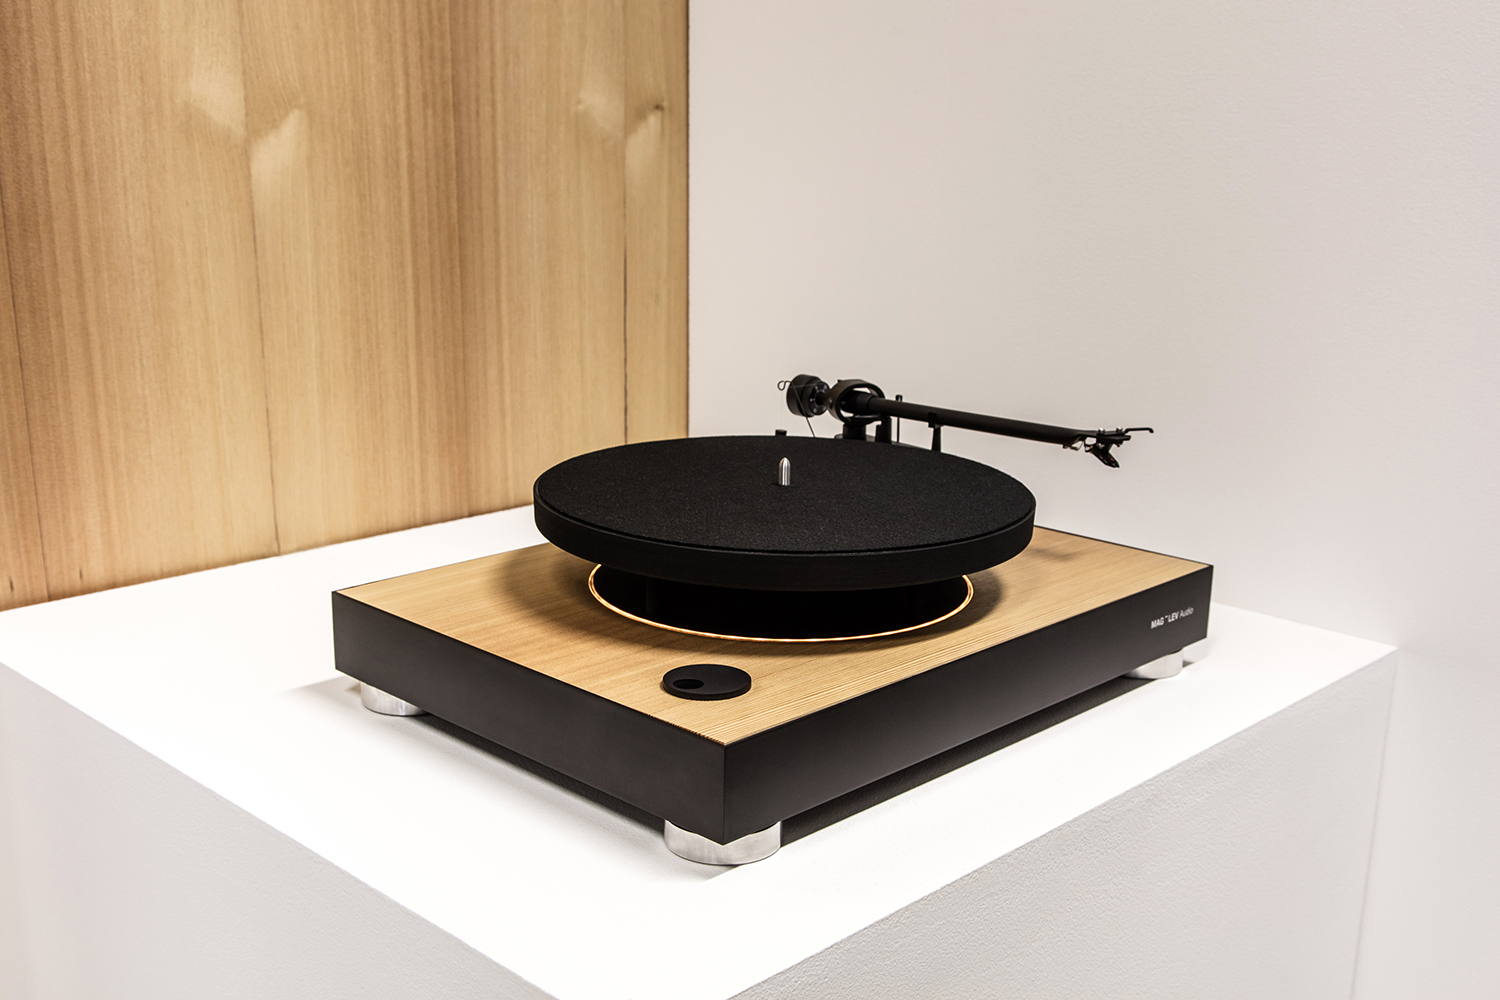 MAG-LEV Audio The First Levitating Turntable